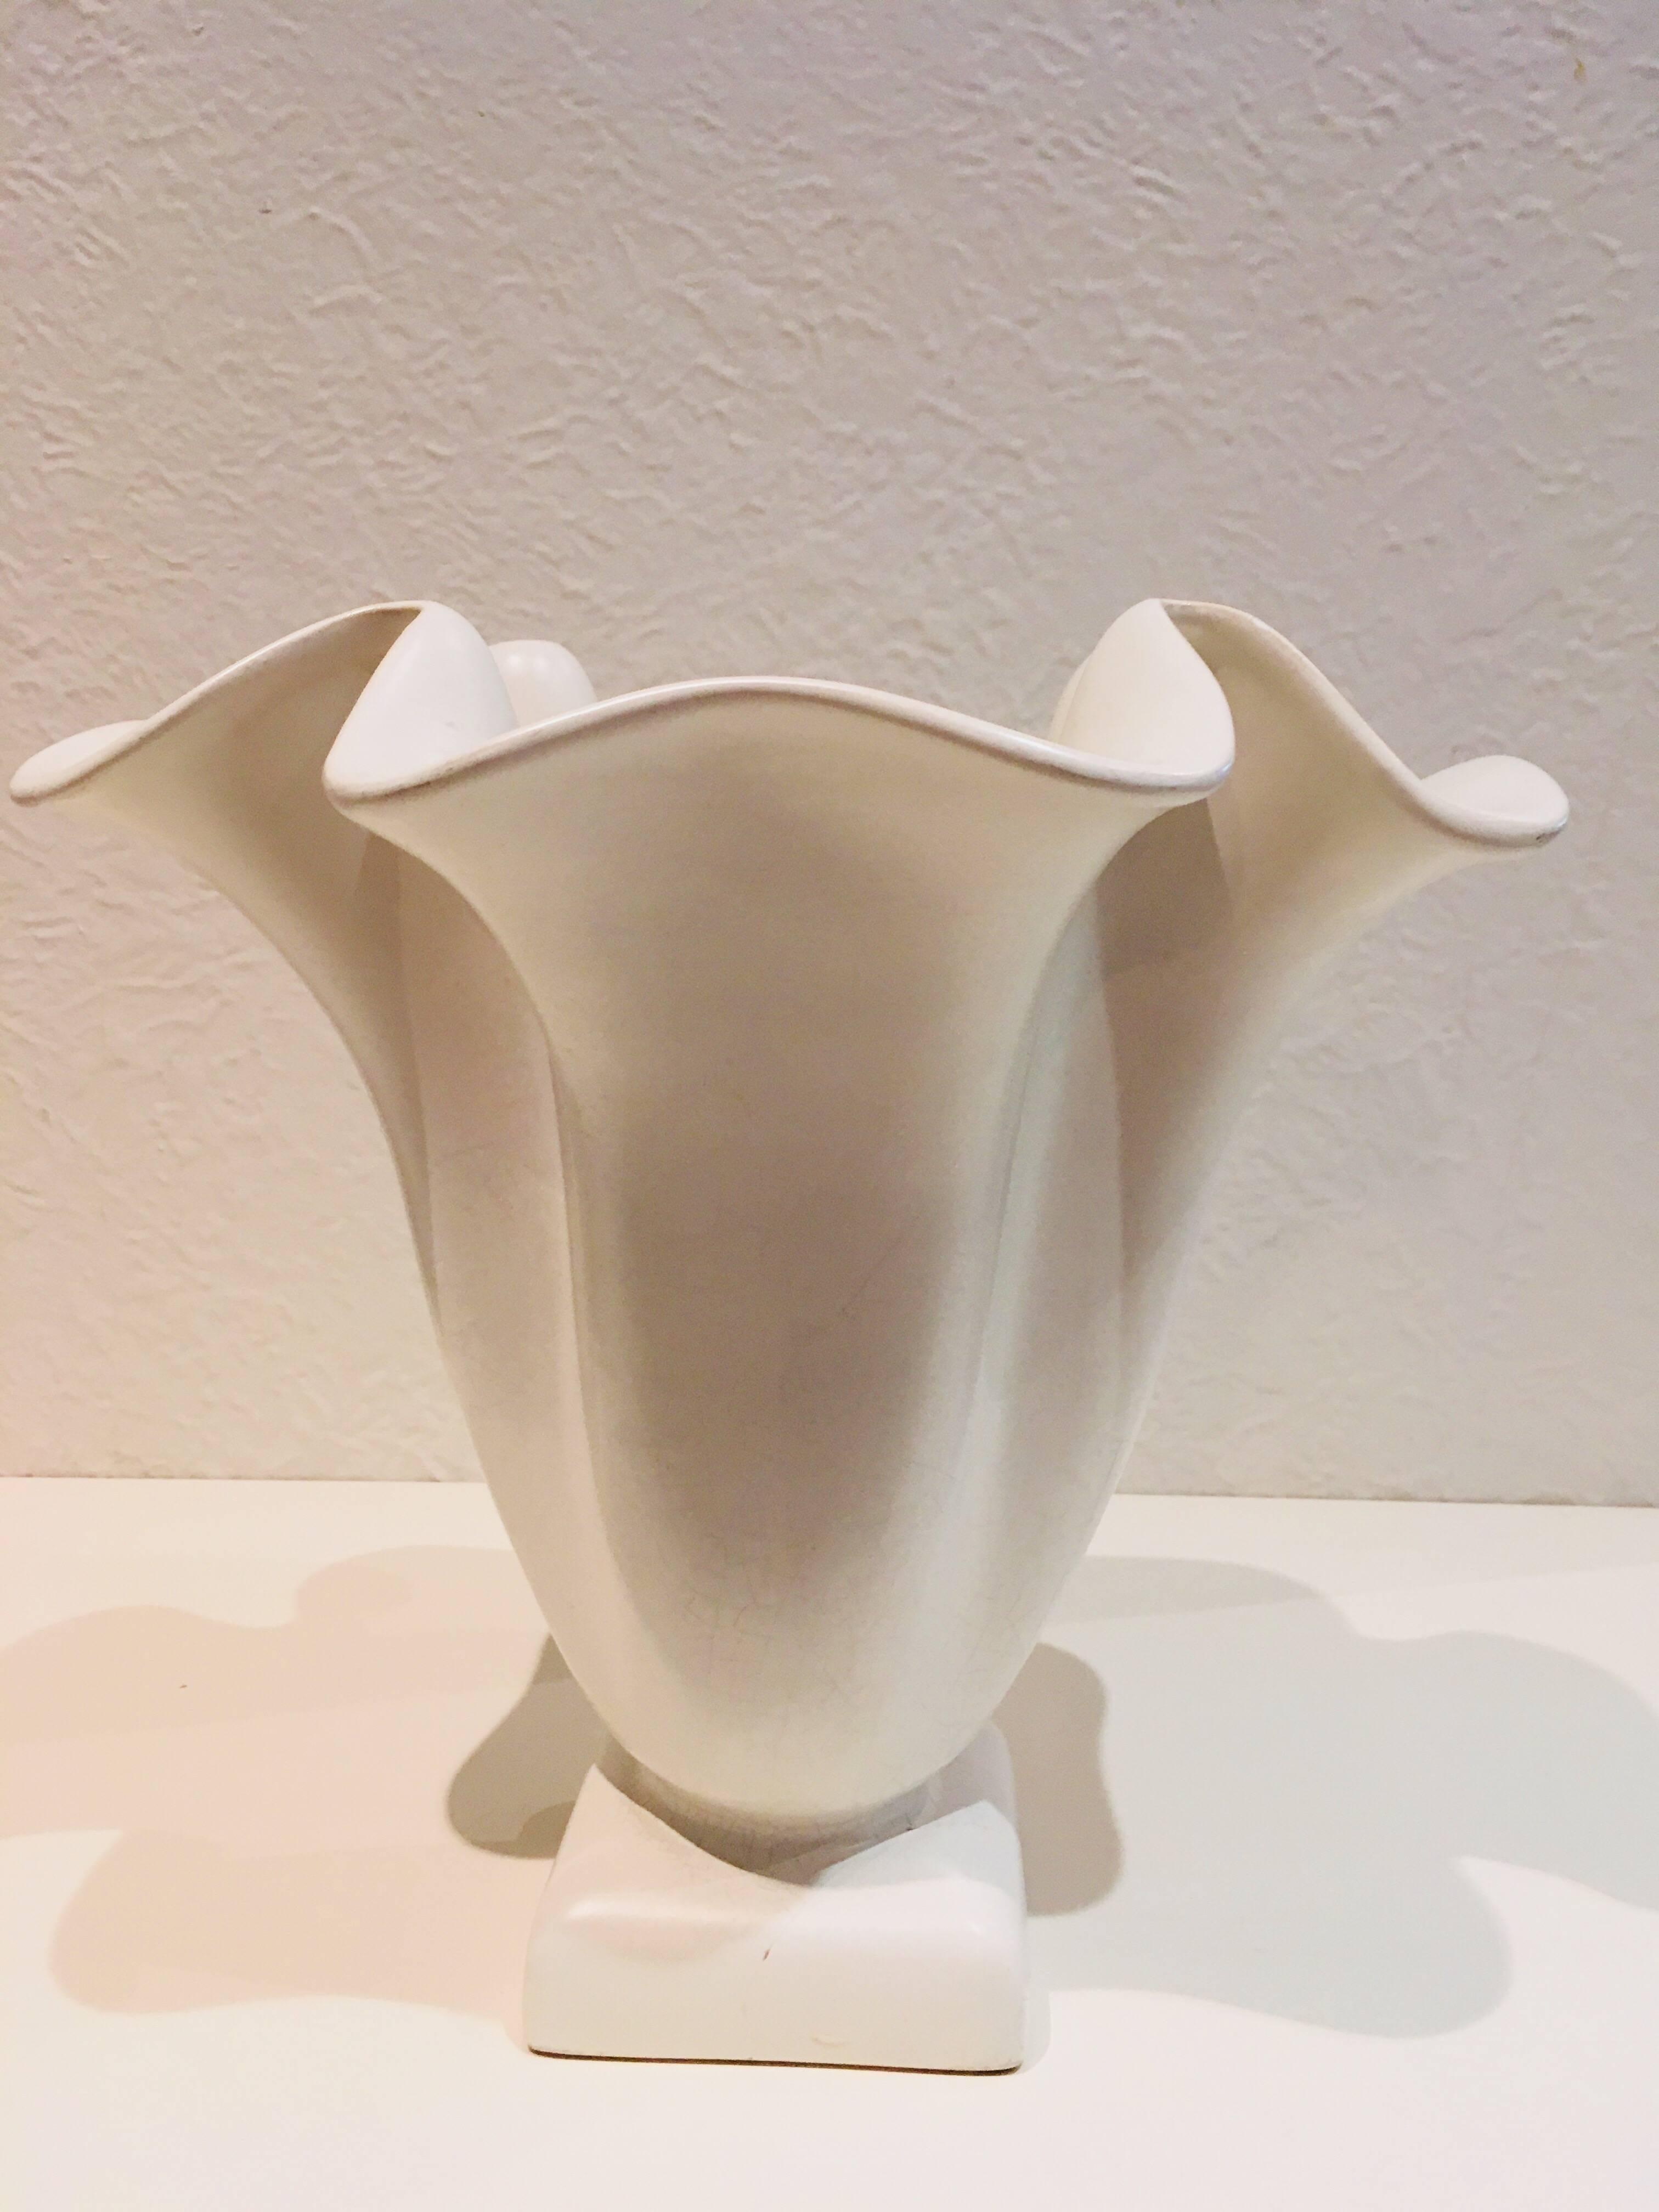 Henning Rathjen Australian pottery vase, stylised free flowing form. These are amongst the most desirable and highly regarded designs by this Australian artist.